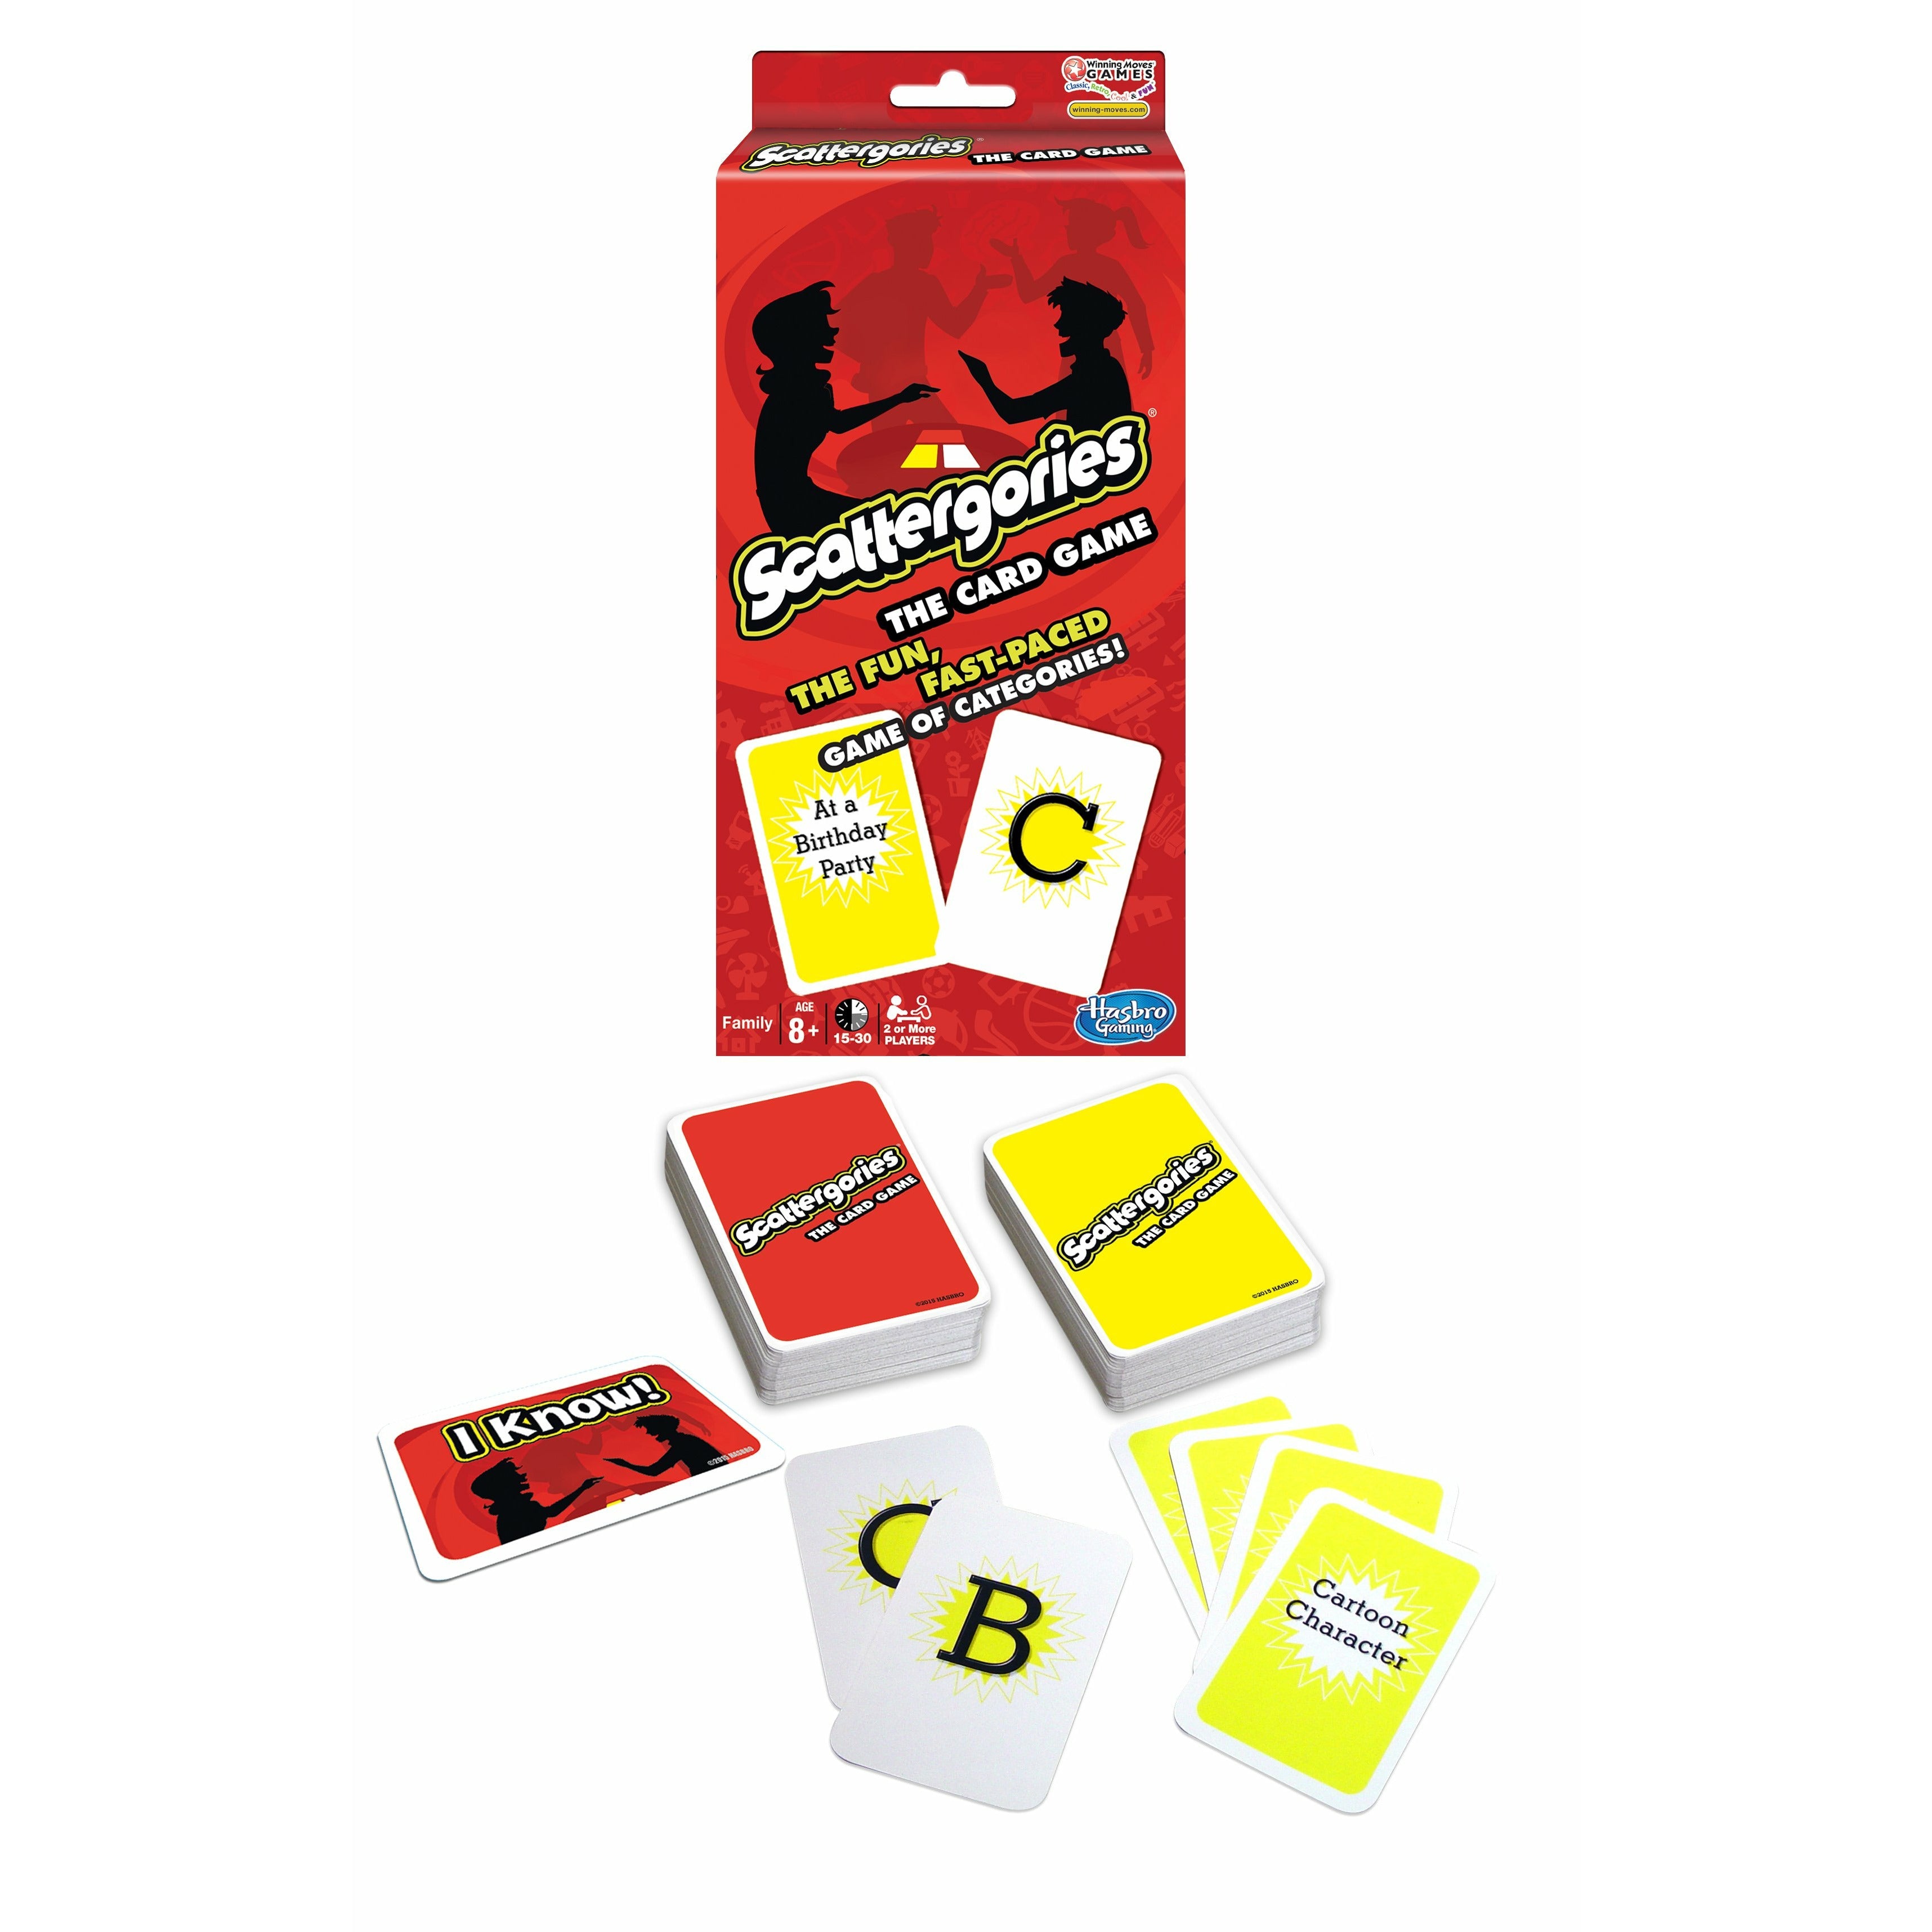 Scattergories®: The Card Game